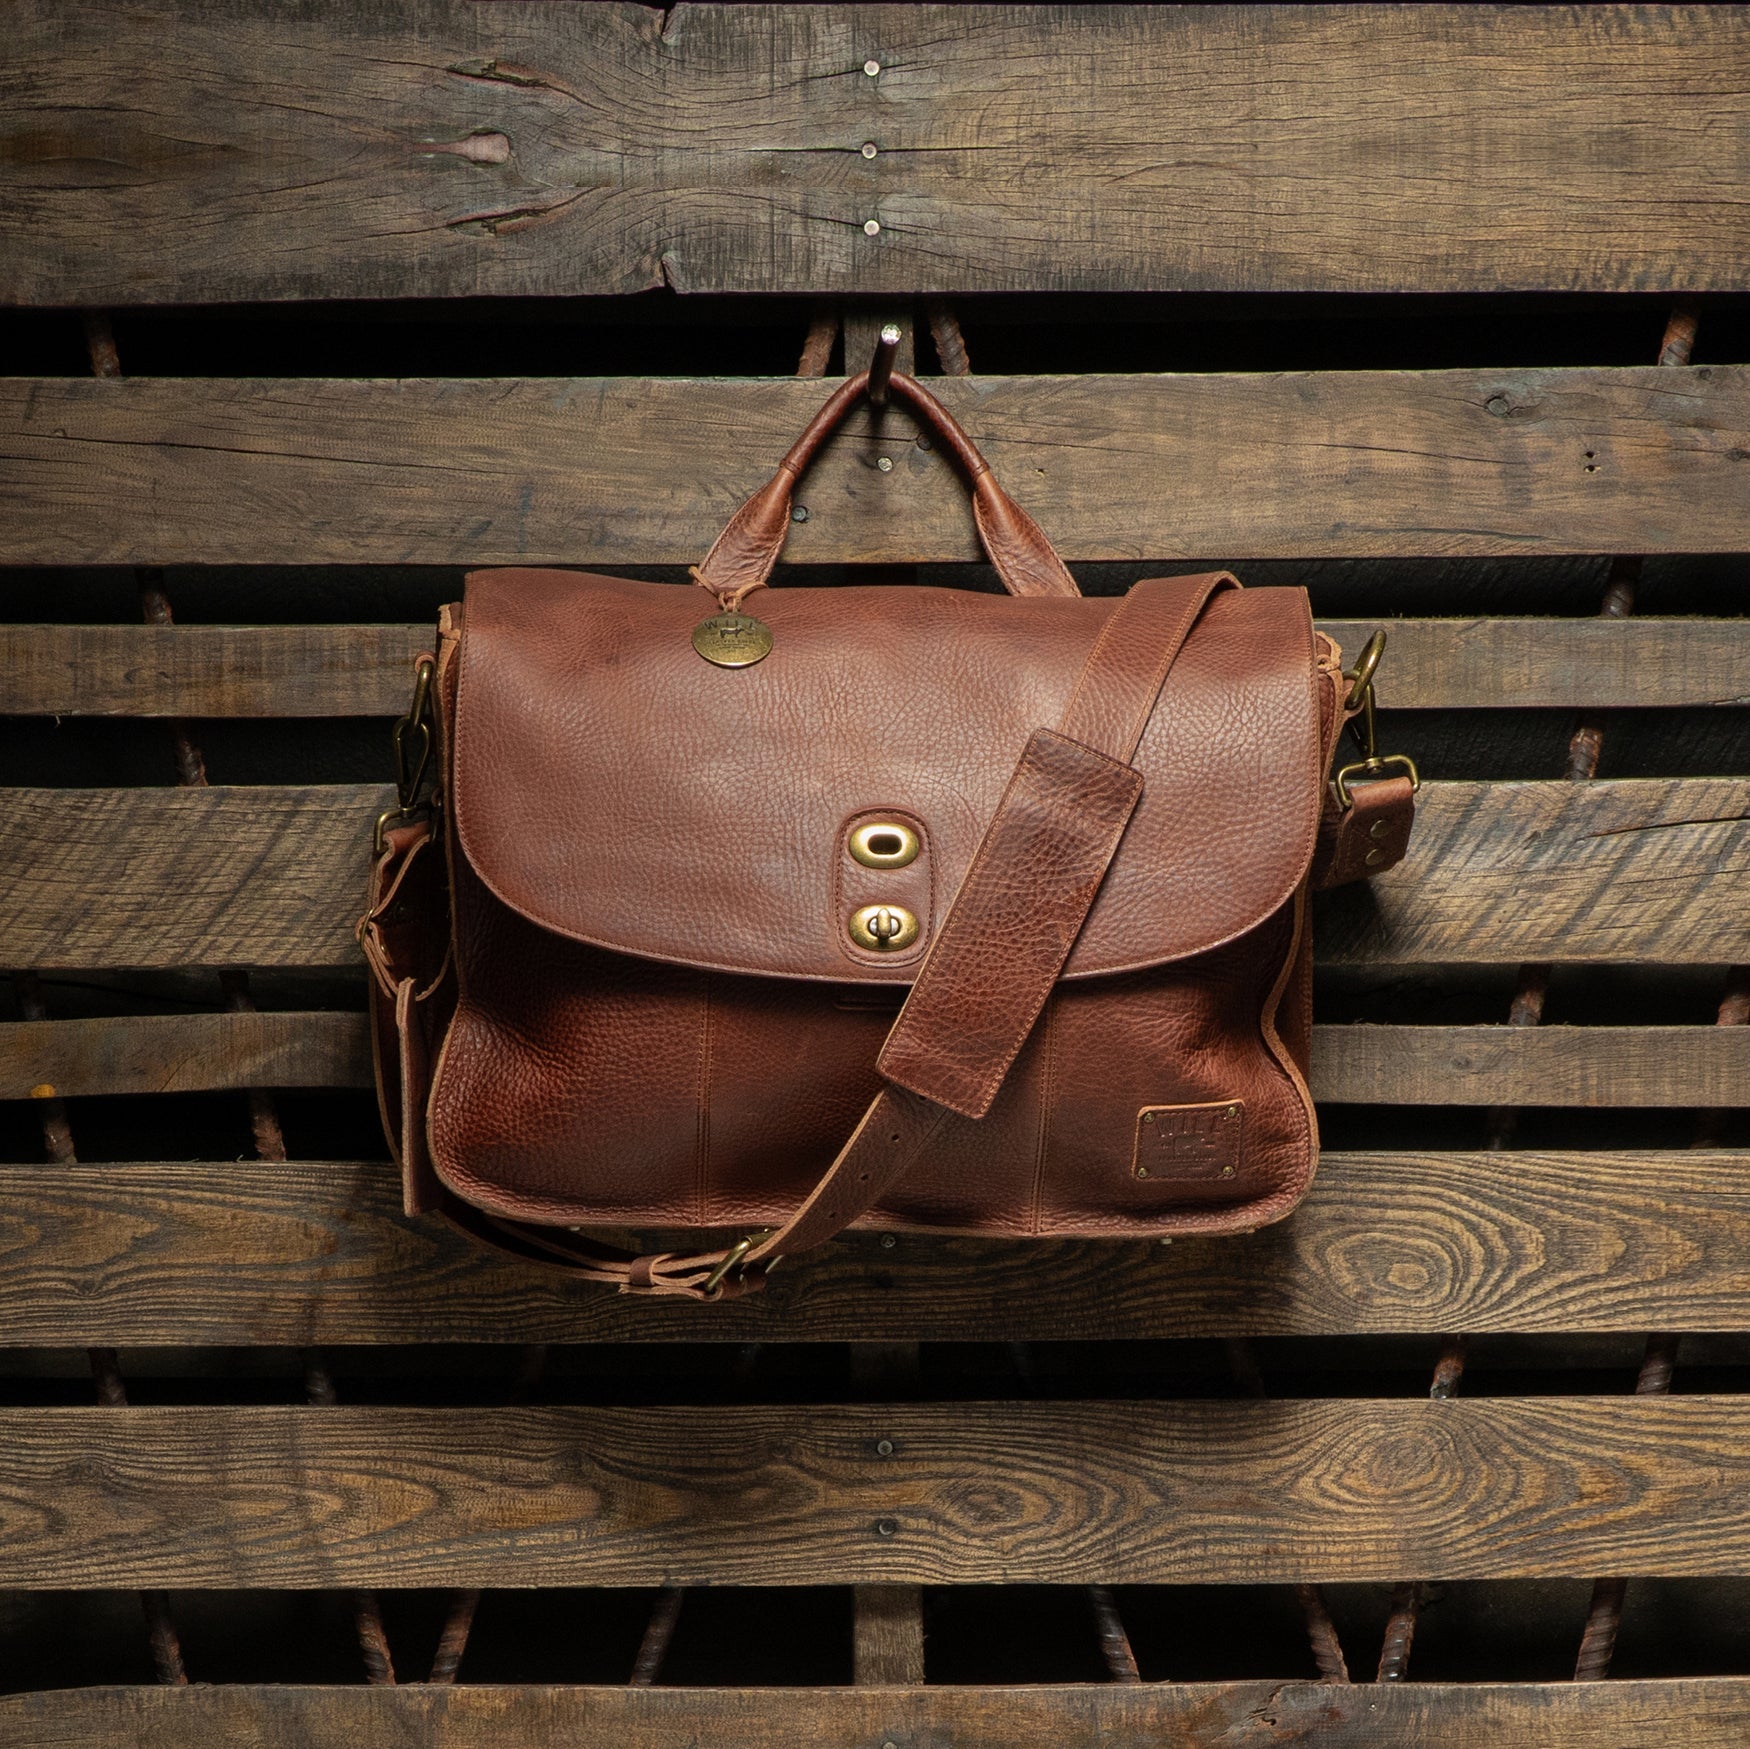 Kent Leather Messenger Bag in Cognac by Will Leather Goods